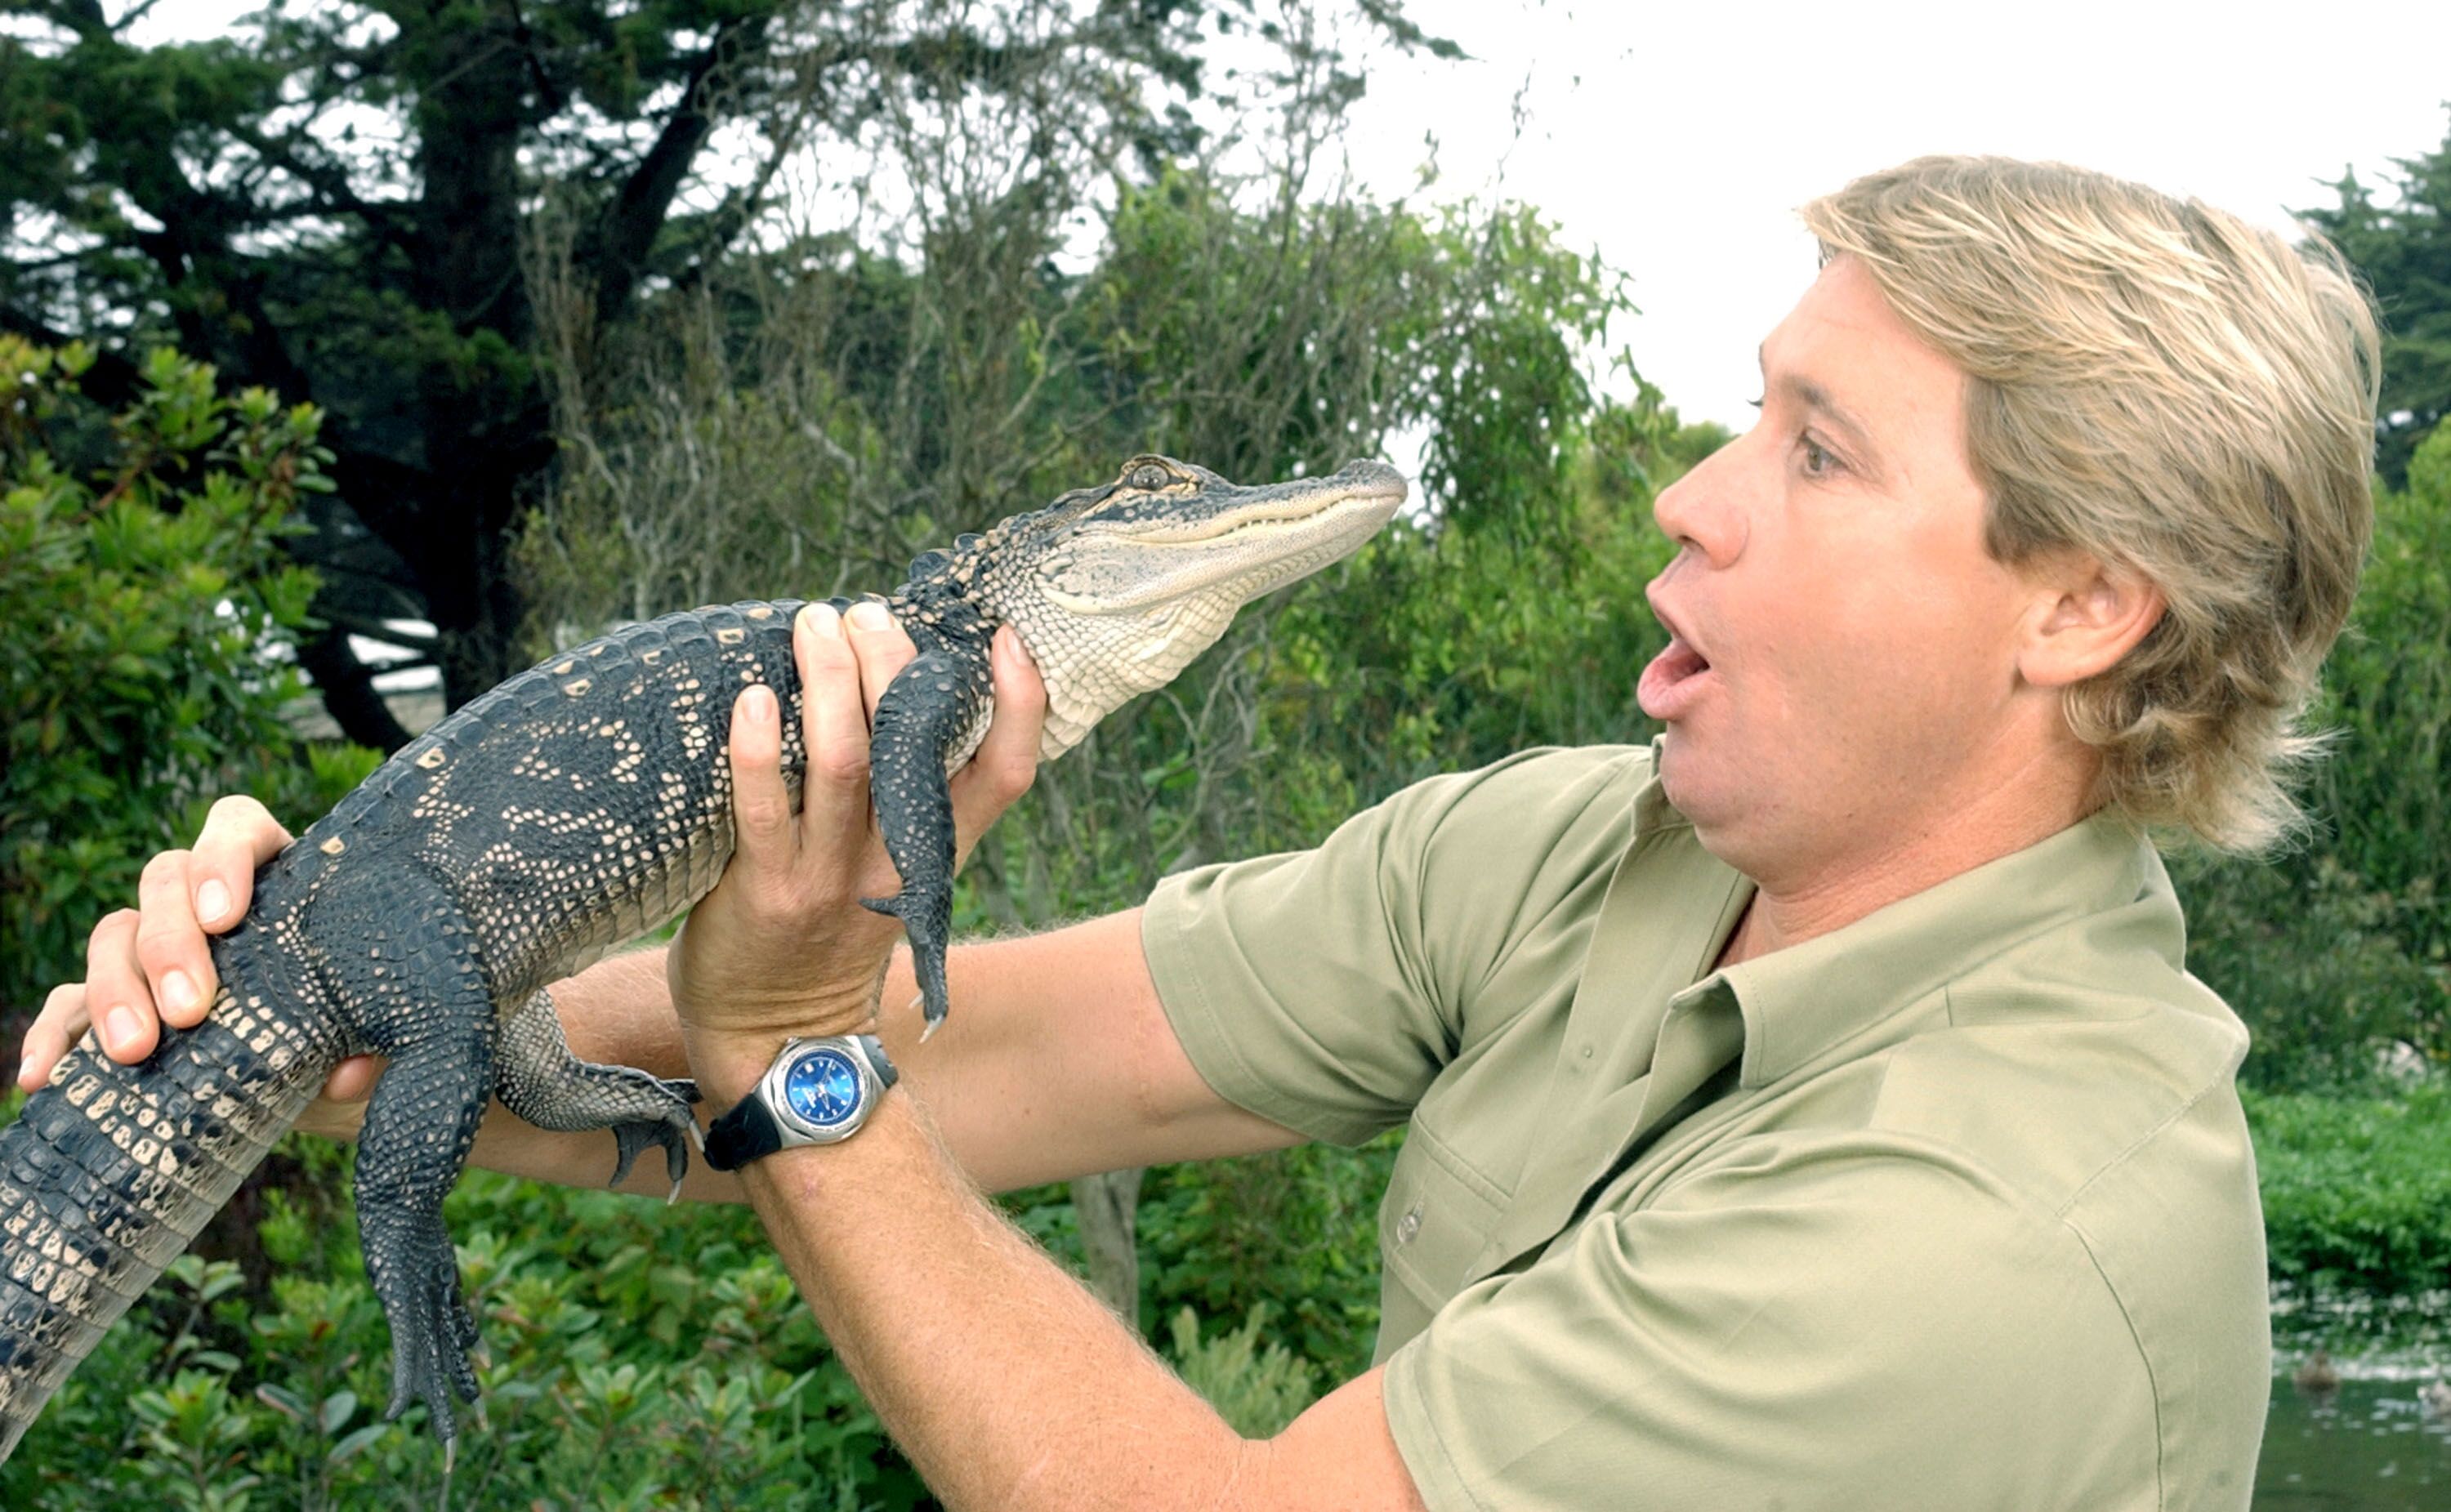 "The Crocodile Hunter", Steve Irwin, poses with a three foot long alligator at the San Francisco Zoo in 2002 | Source: Getty Images